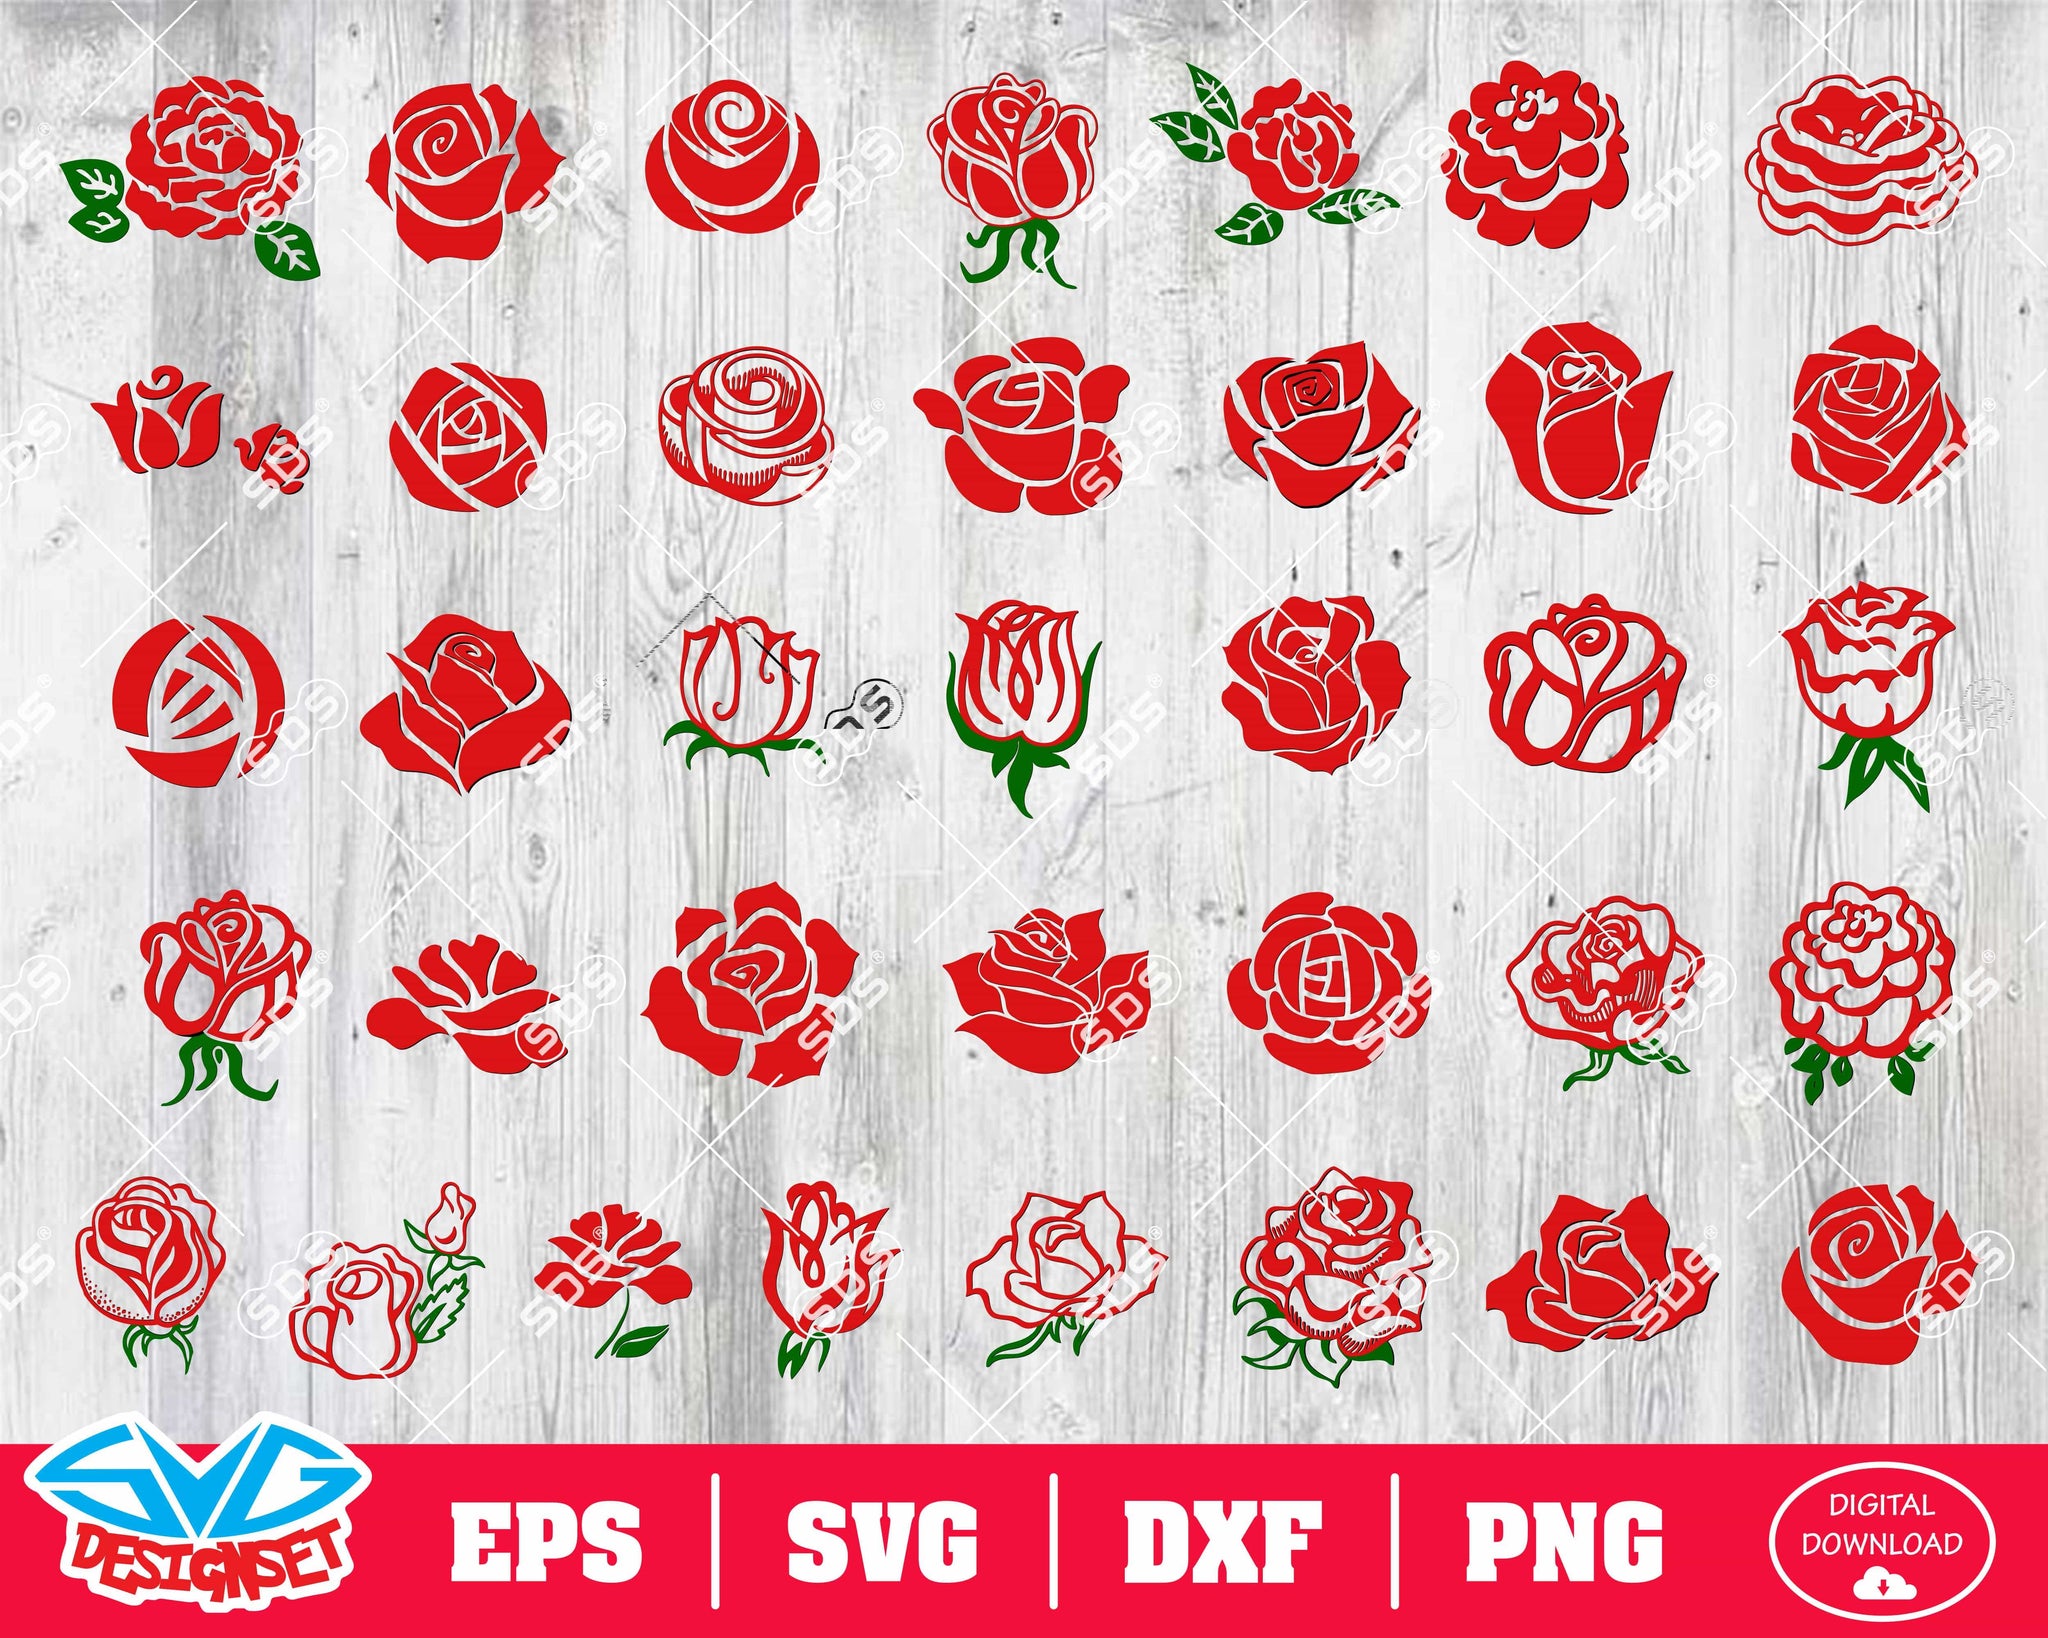 Rose Svg, Dxf, Eps, Png, Clipart, Silhouette and Cutfiles #2 - SVGDesignSets